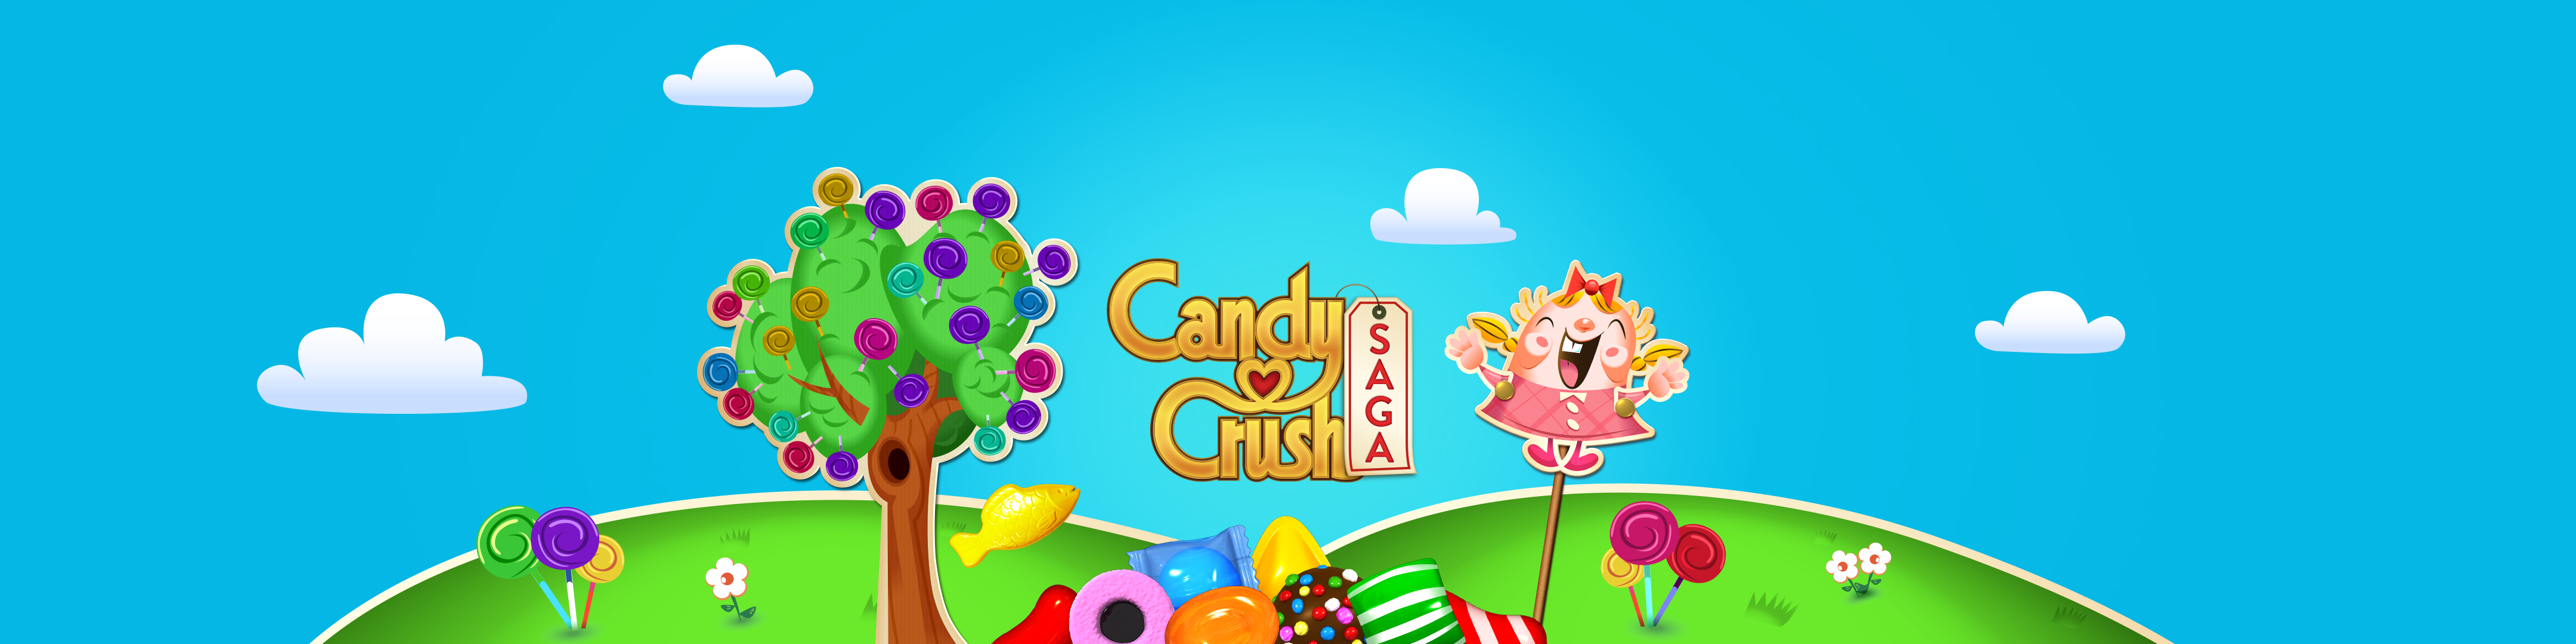 why wont candy crush load